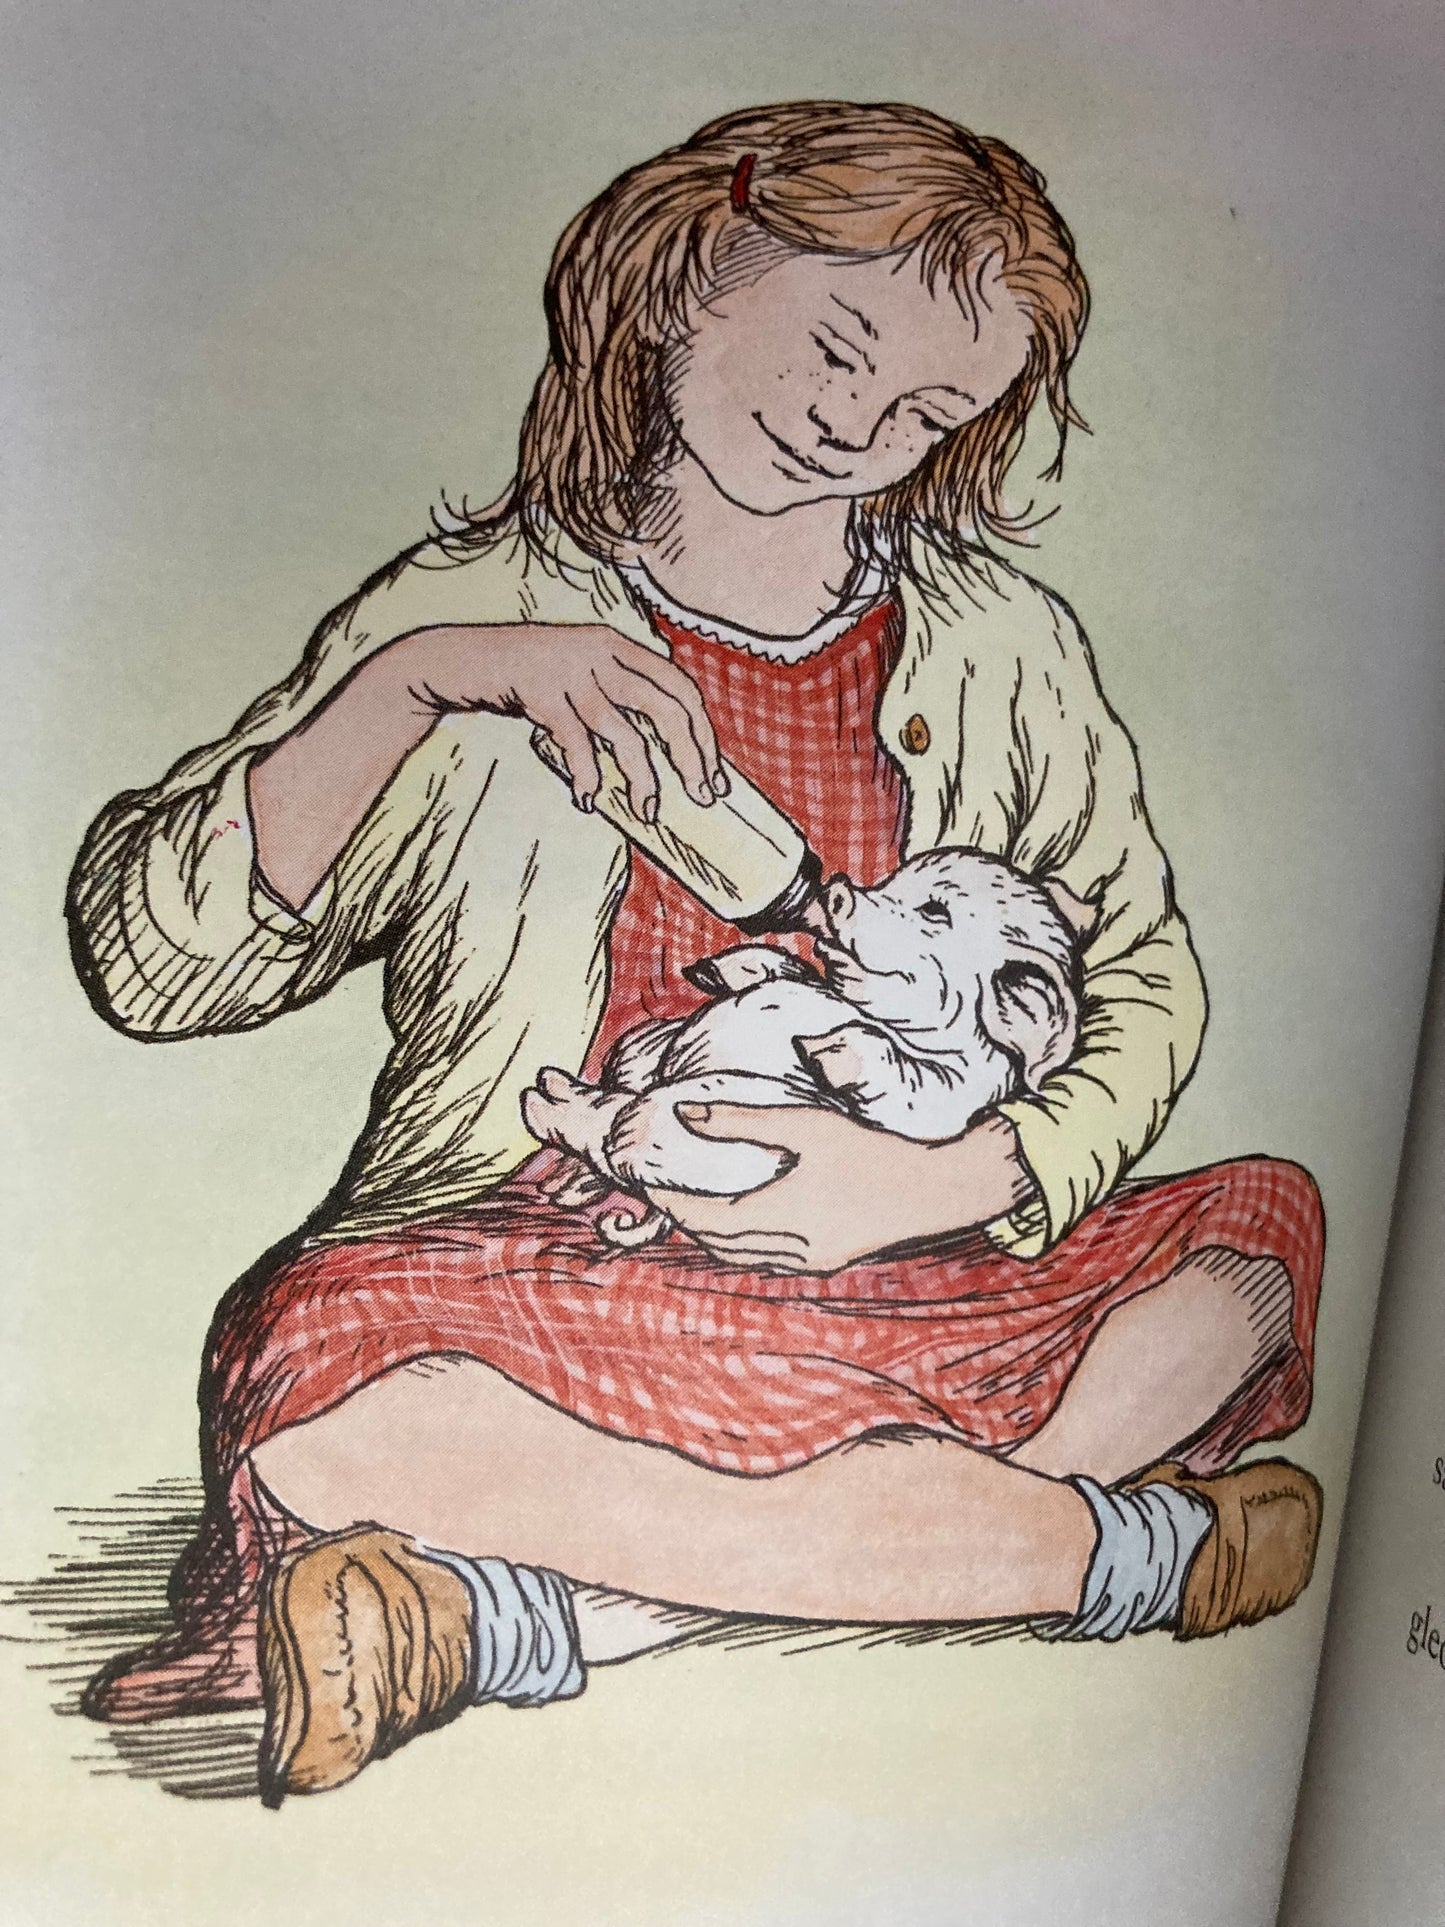 Chapter Book for Young Readers - CHARLOTTE'S WEB